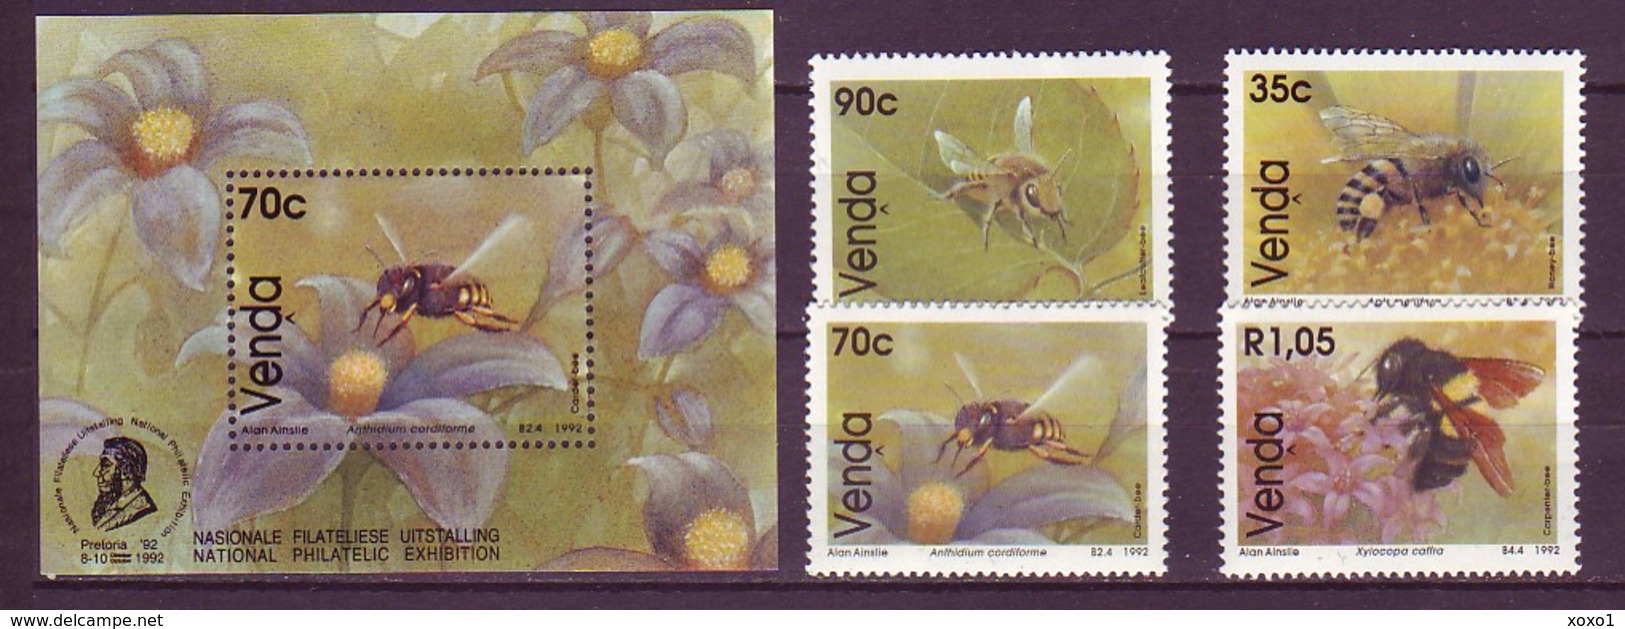 Venda South Africa 1992 MiNr. 237 - 241 (Block 8) Bees Honeybees Insects 4v+1 MNH** 13.00 € - Abeilles